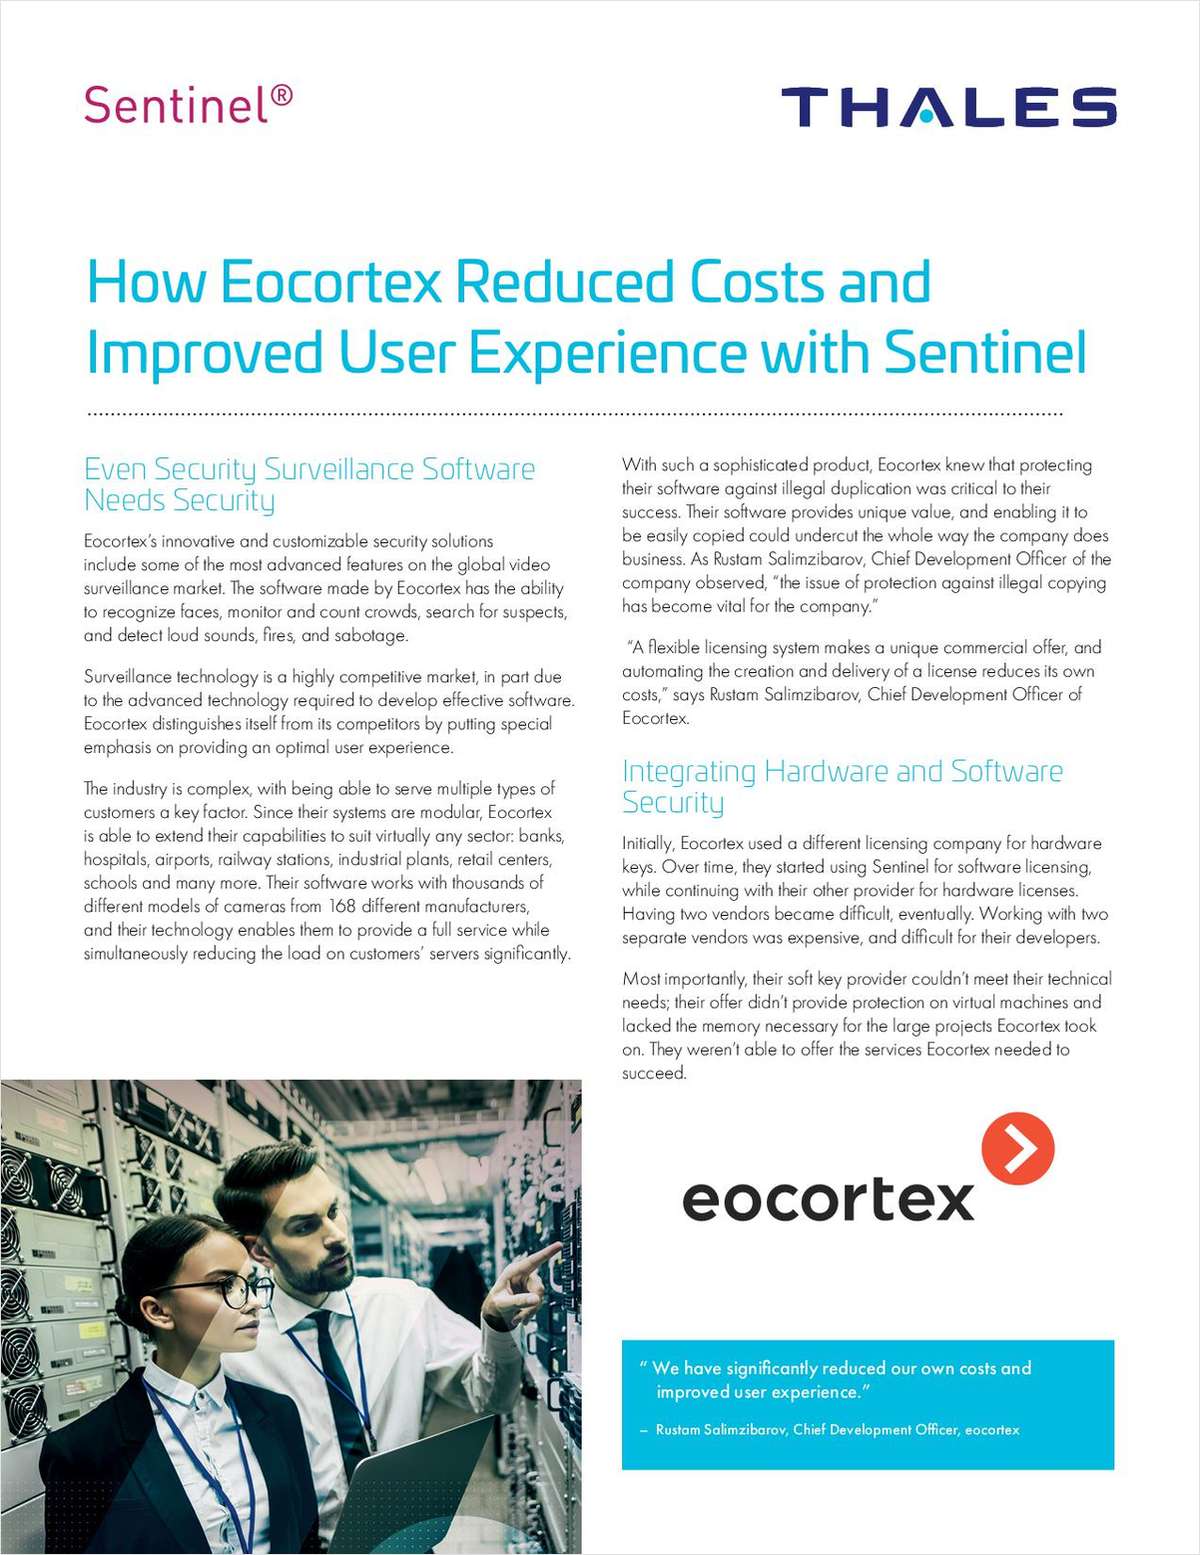 How Eocortex Reduced Costs and Improved User Experience with Sentinel